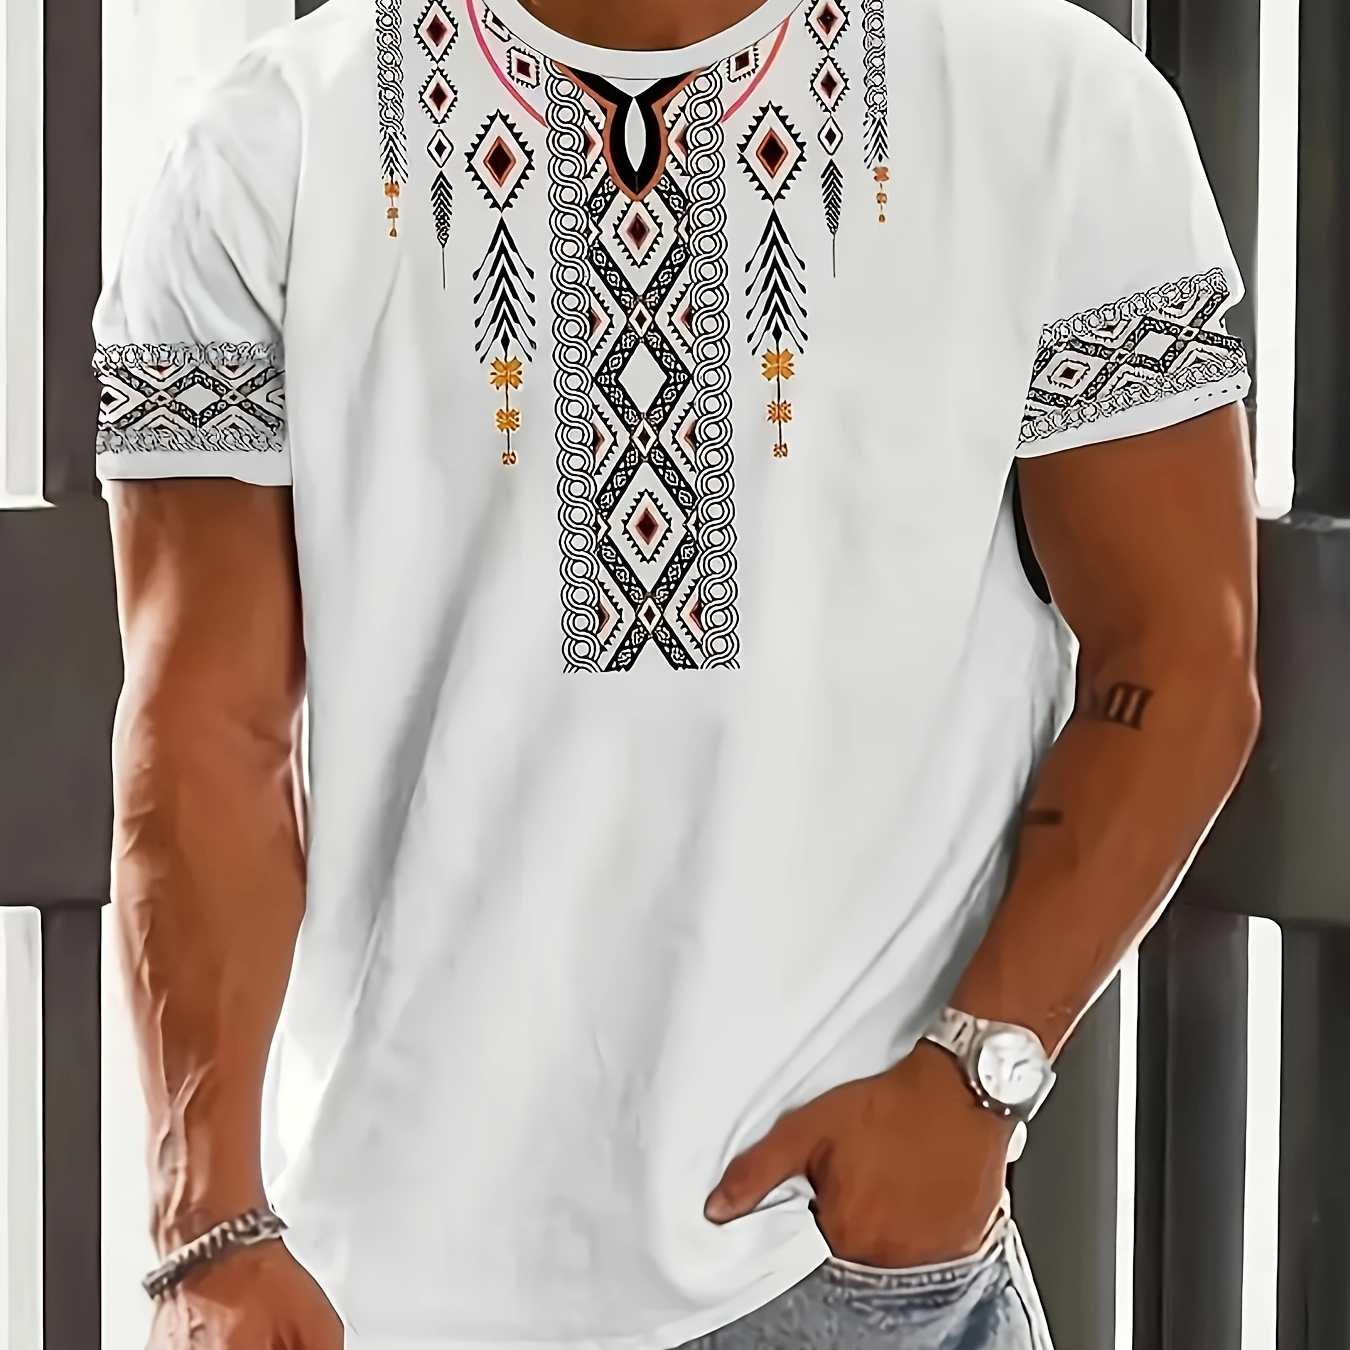 

Men's Ethnic Style Geometric Graphic Pattern Crew Neck Short Sleeve T-shirt, Stylish And Chic Retro Style Tops For Summer Outdoors And Holiday Wear